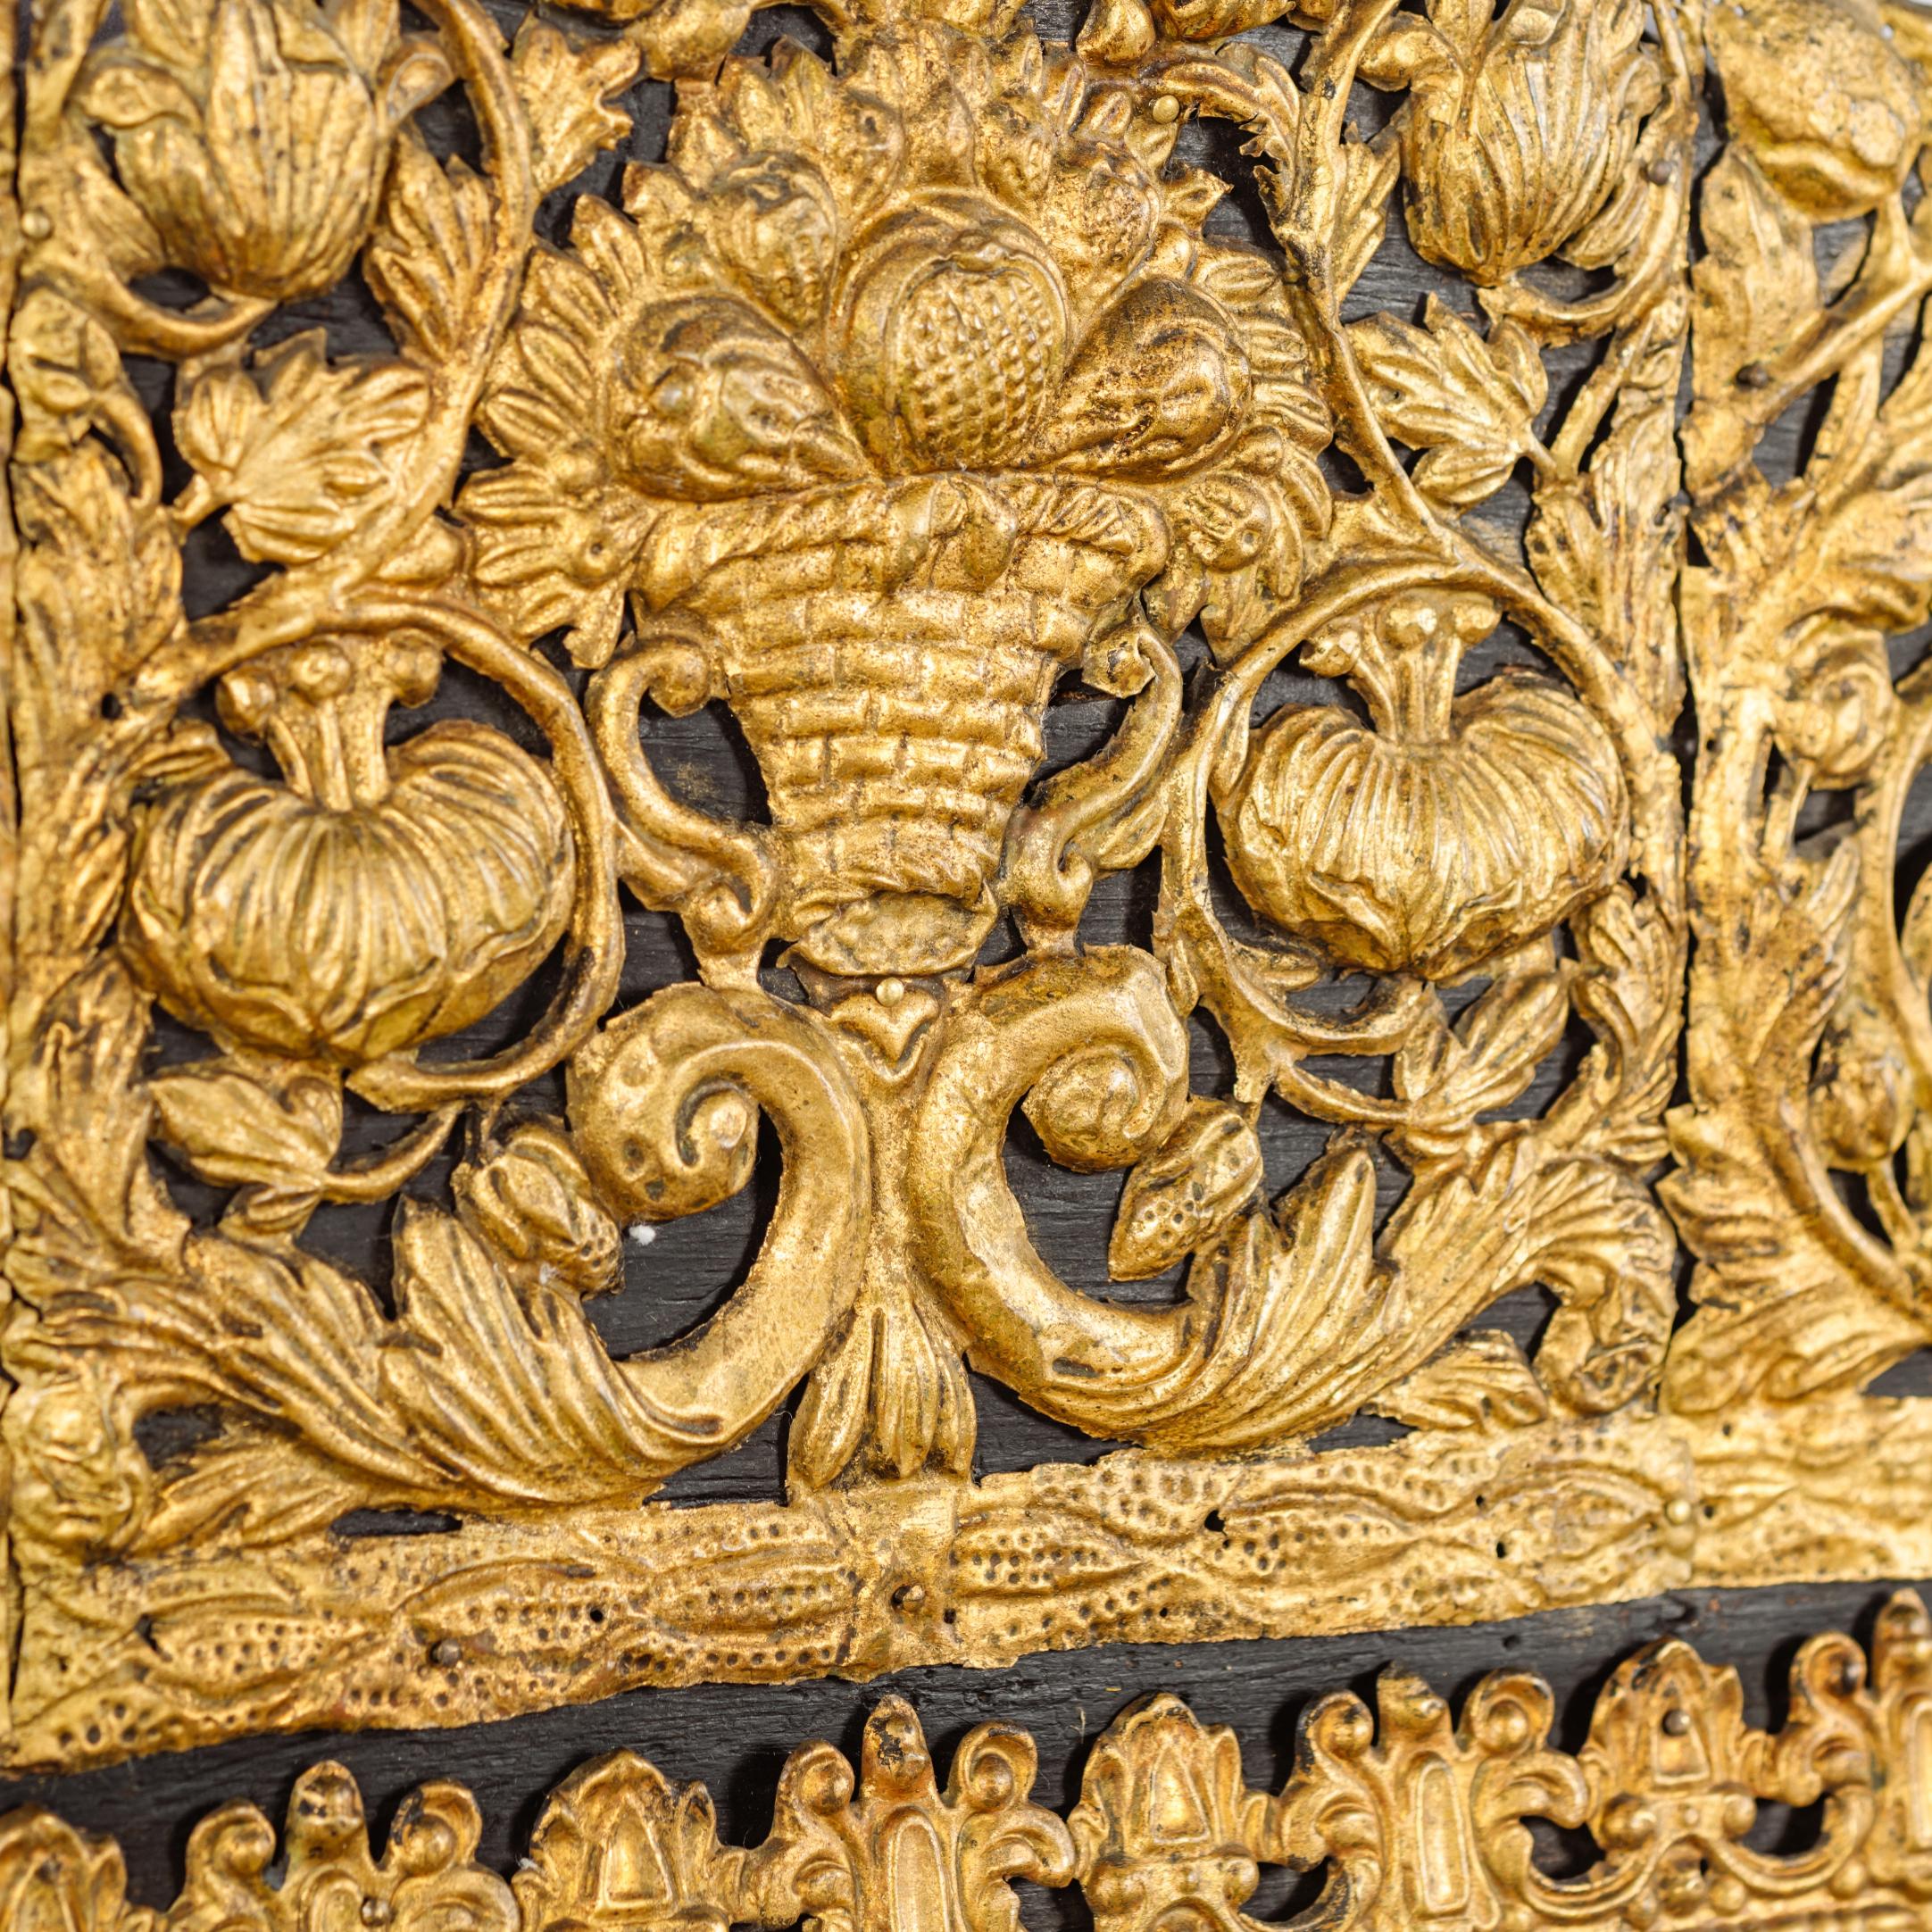 A fine Dutch ebonized and repousse gilt-metal cushion mirror.

The rectangular beveled mirror plate with ebonized frame and marginal borders, surmounted by an arched cresting headed by a basket issuing fruit, applied overall with repousse worked